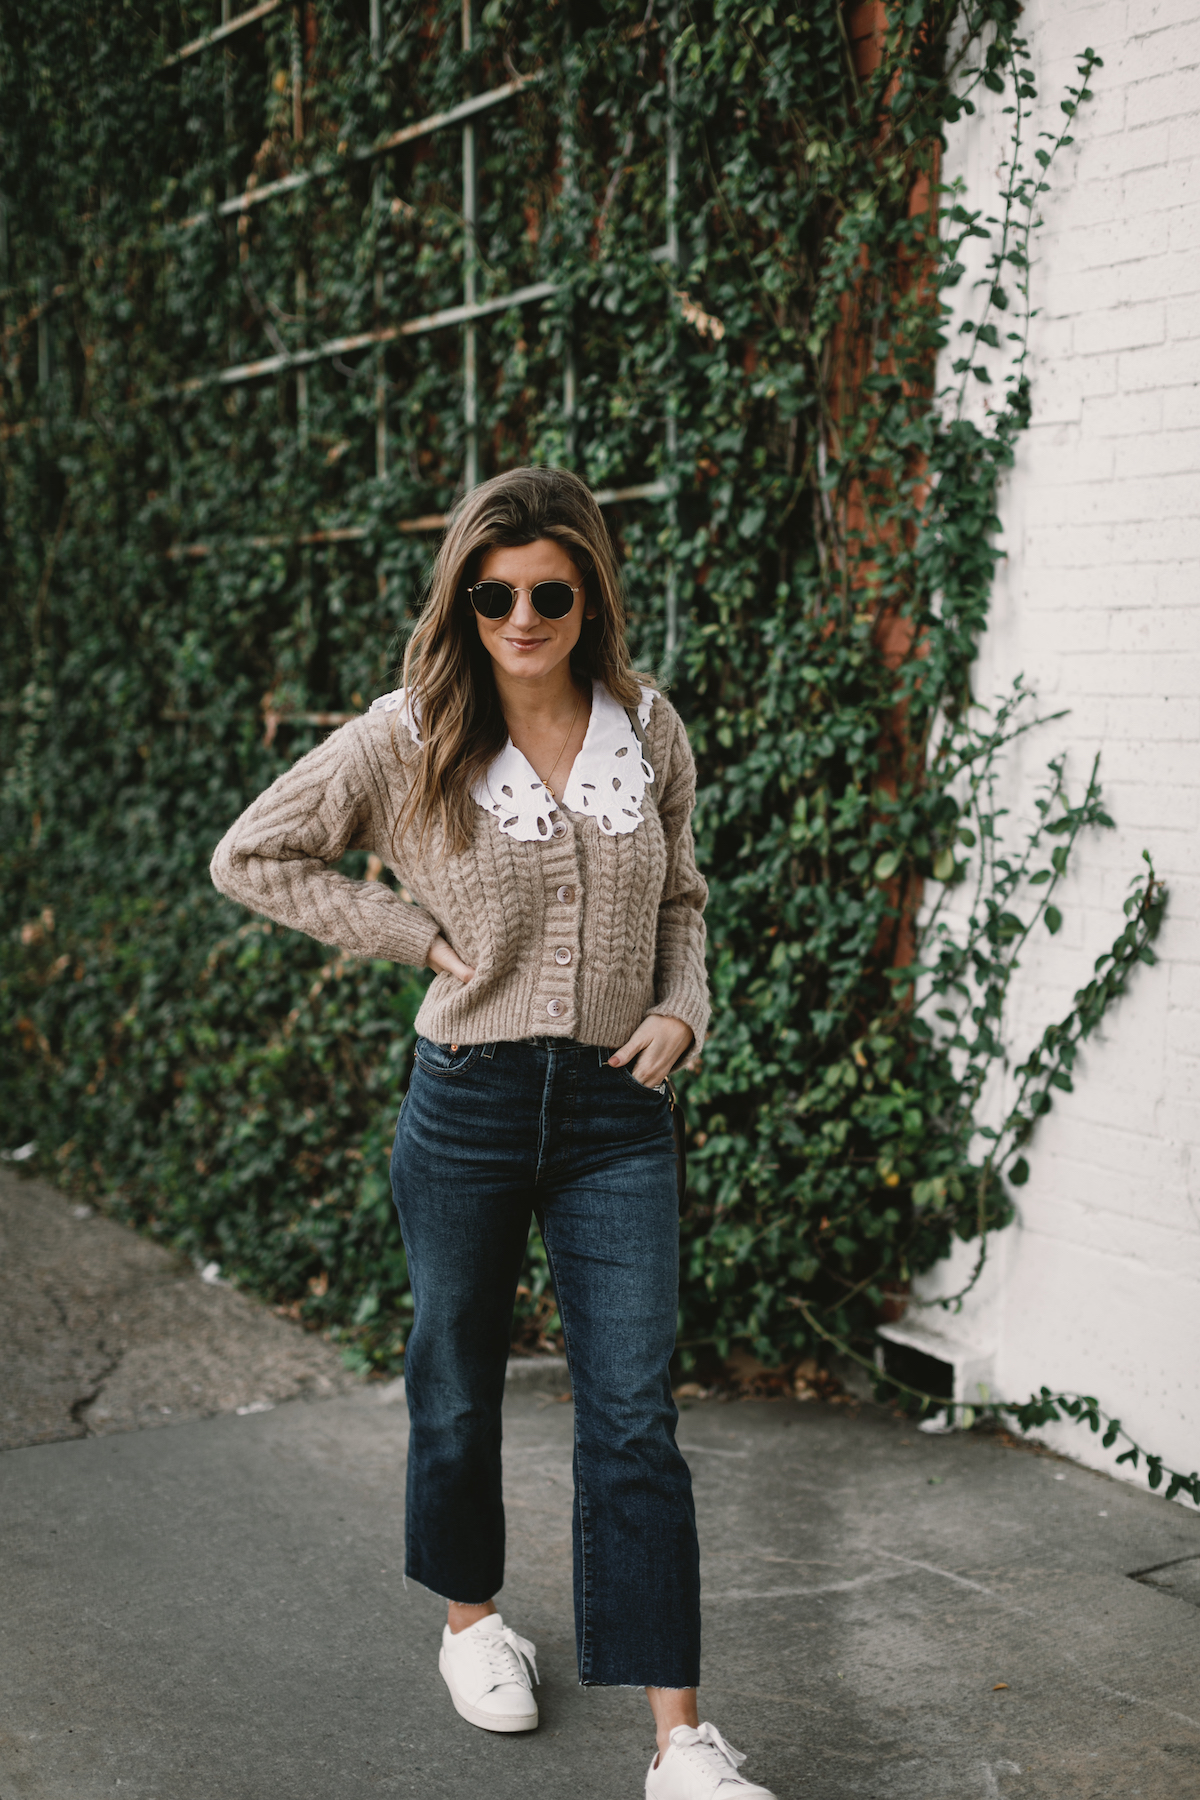 Brighton Butler wearing Levi Ribacage jeans, ASTR Cardigan with white collar and frye sneakers